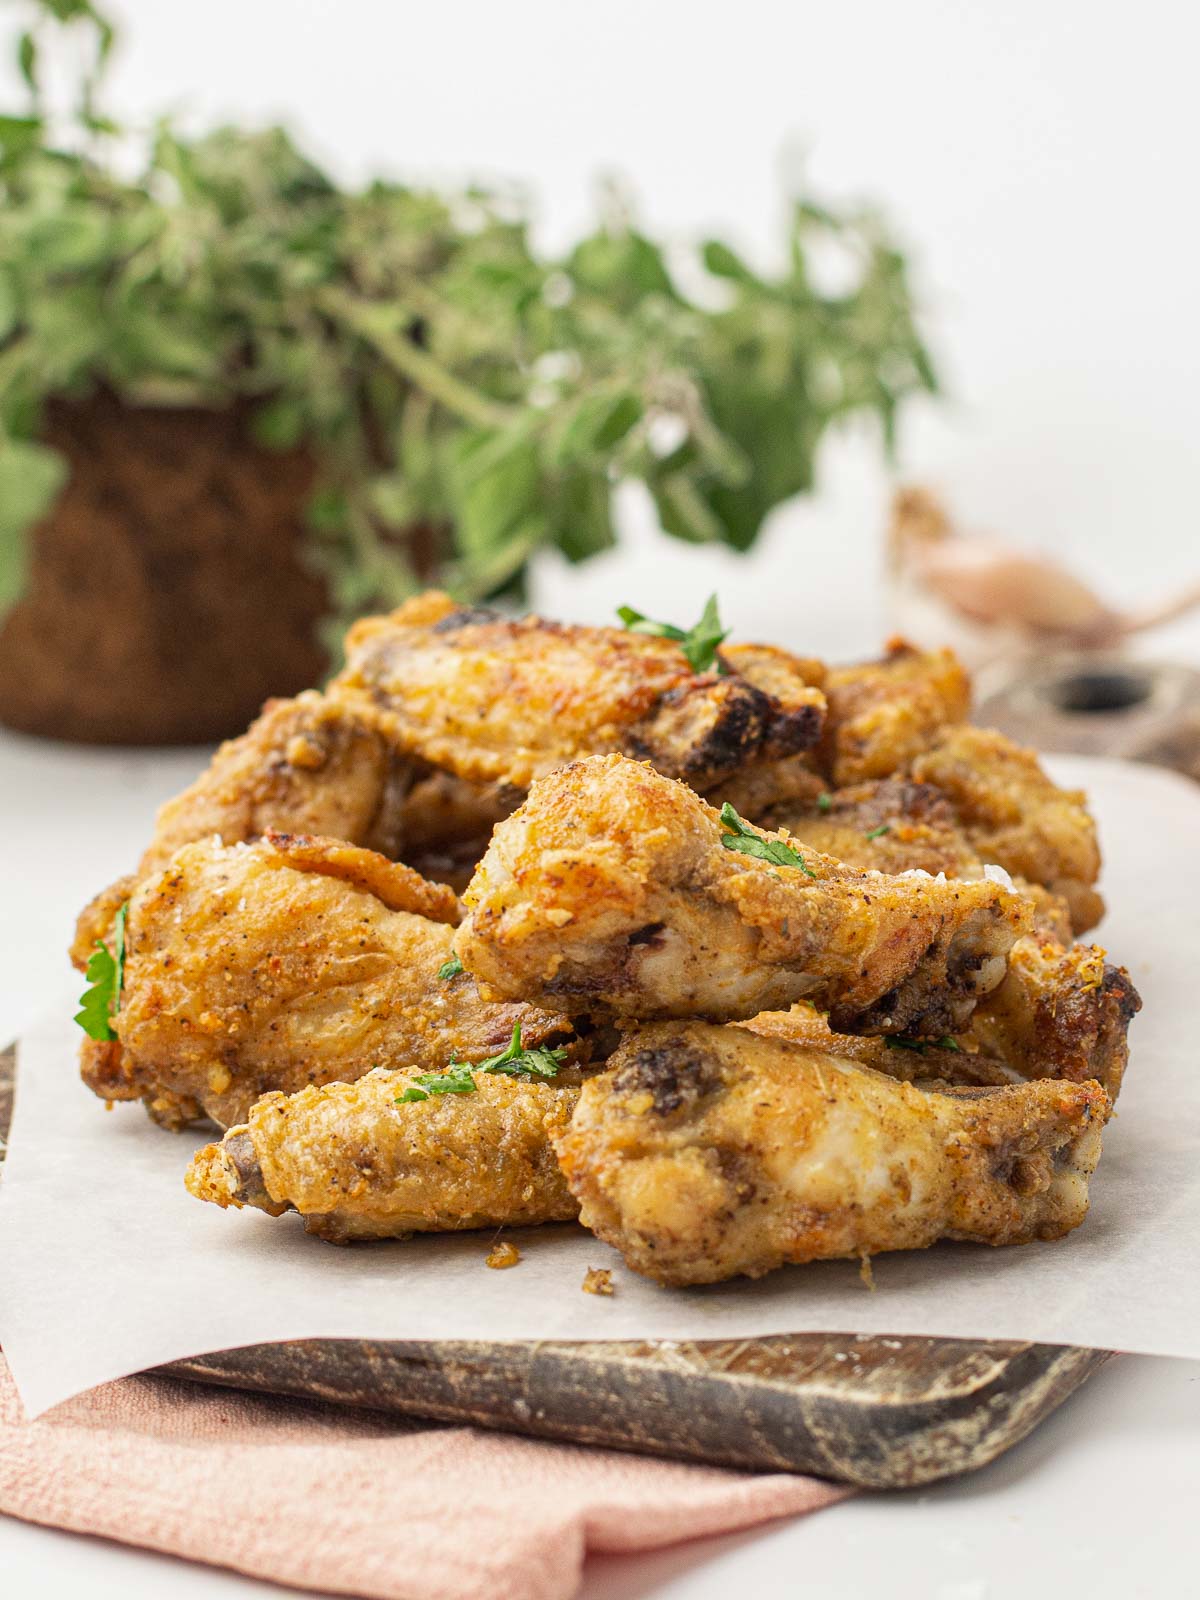 A platter of air fried chicken wings with garlic parmesan sauce.